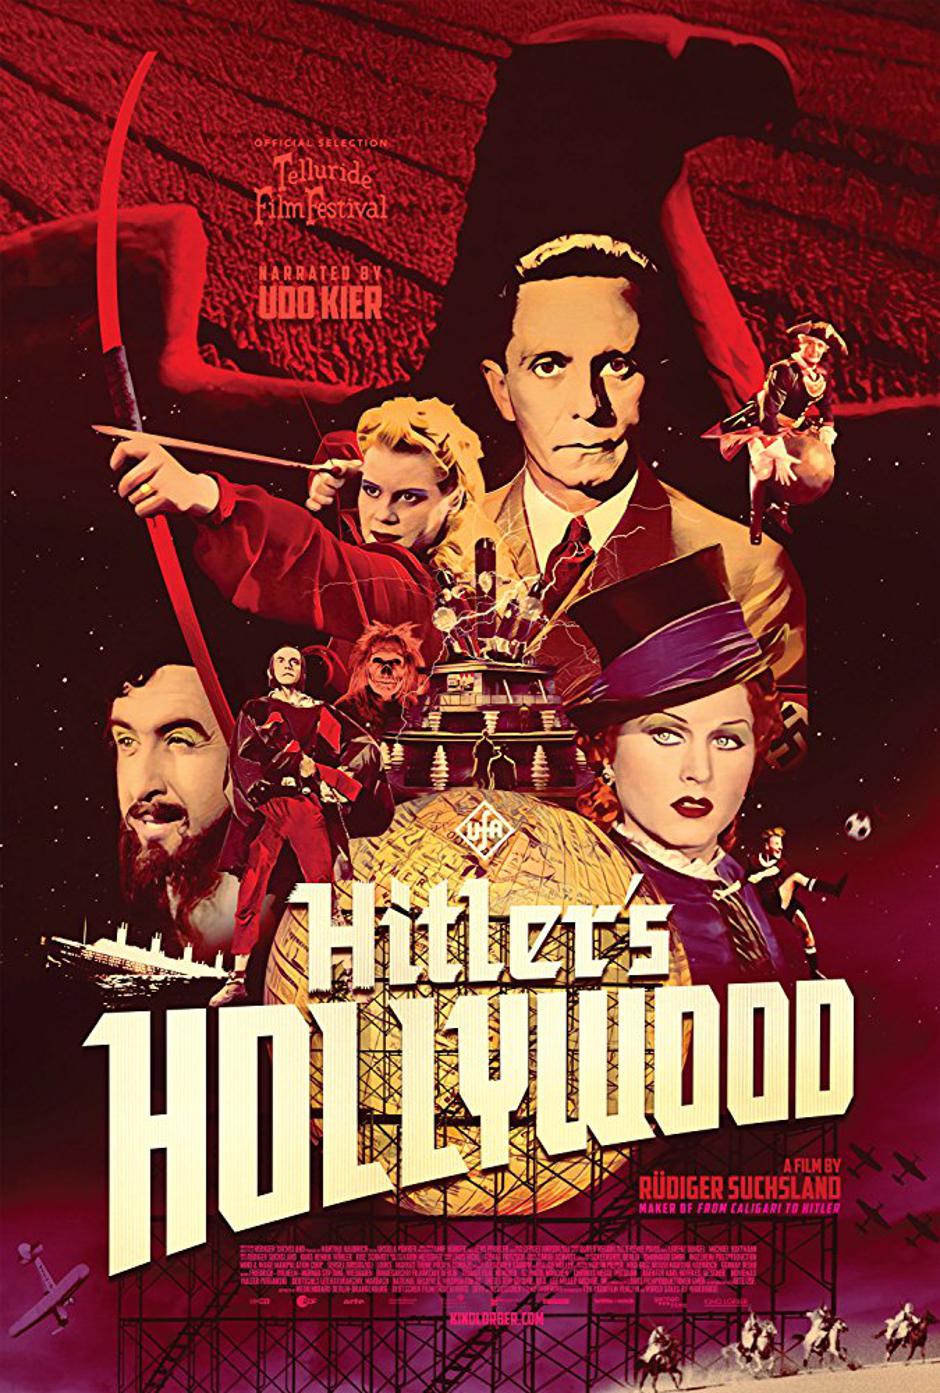 Hitlerov Hollywood | Author: The Mirisch Company/United Artists